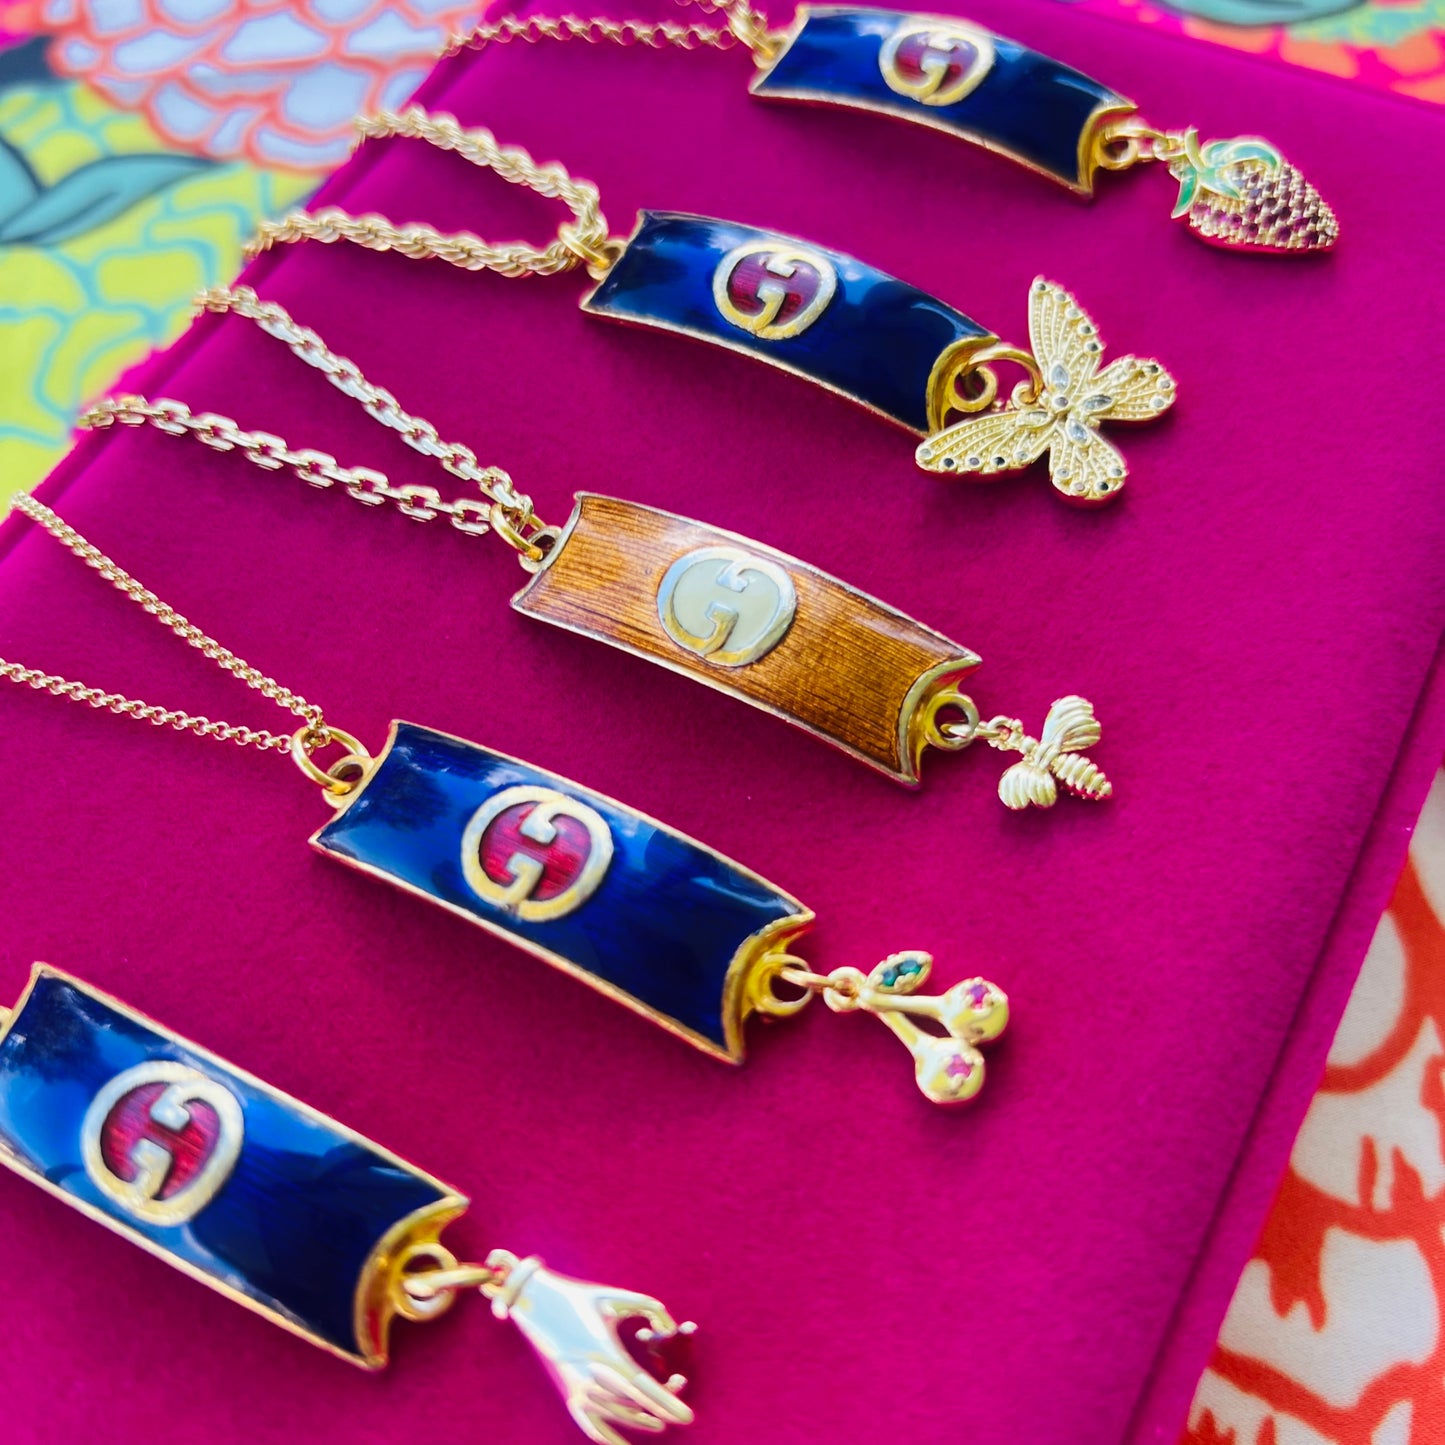 Repurposed Vintage 1970’s Red and Blue GG Charm Necklace